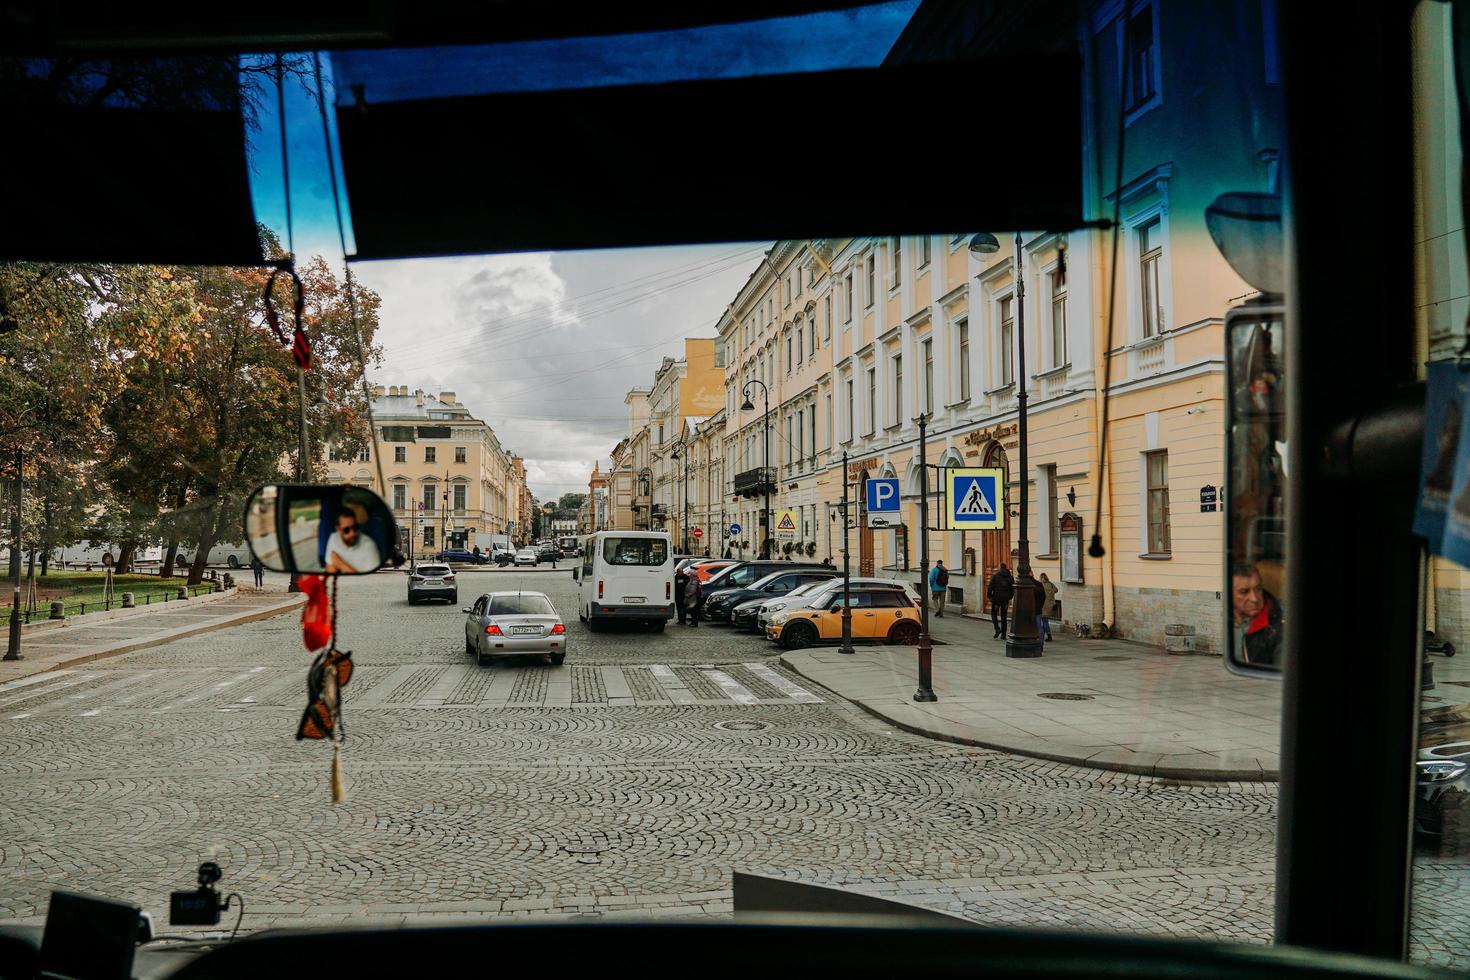 St Petersburg, Russia, 2021 - View from the bus window photo